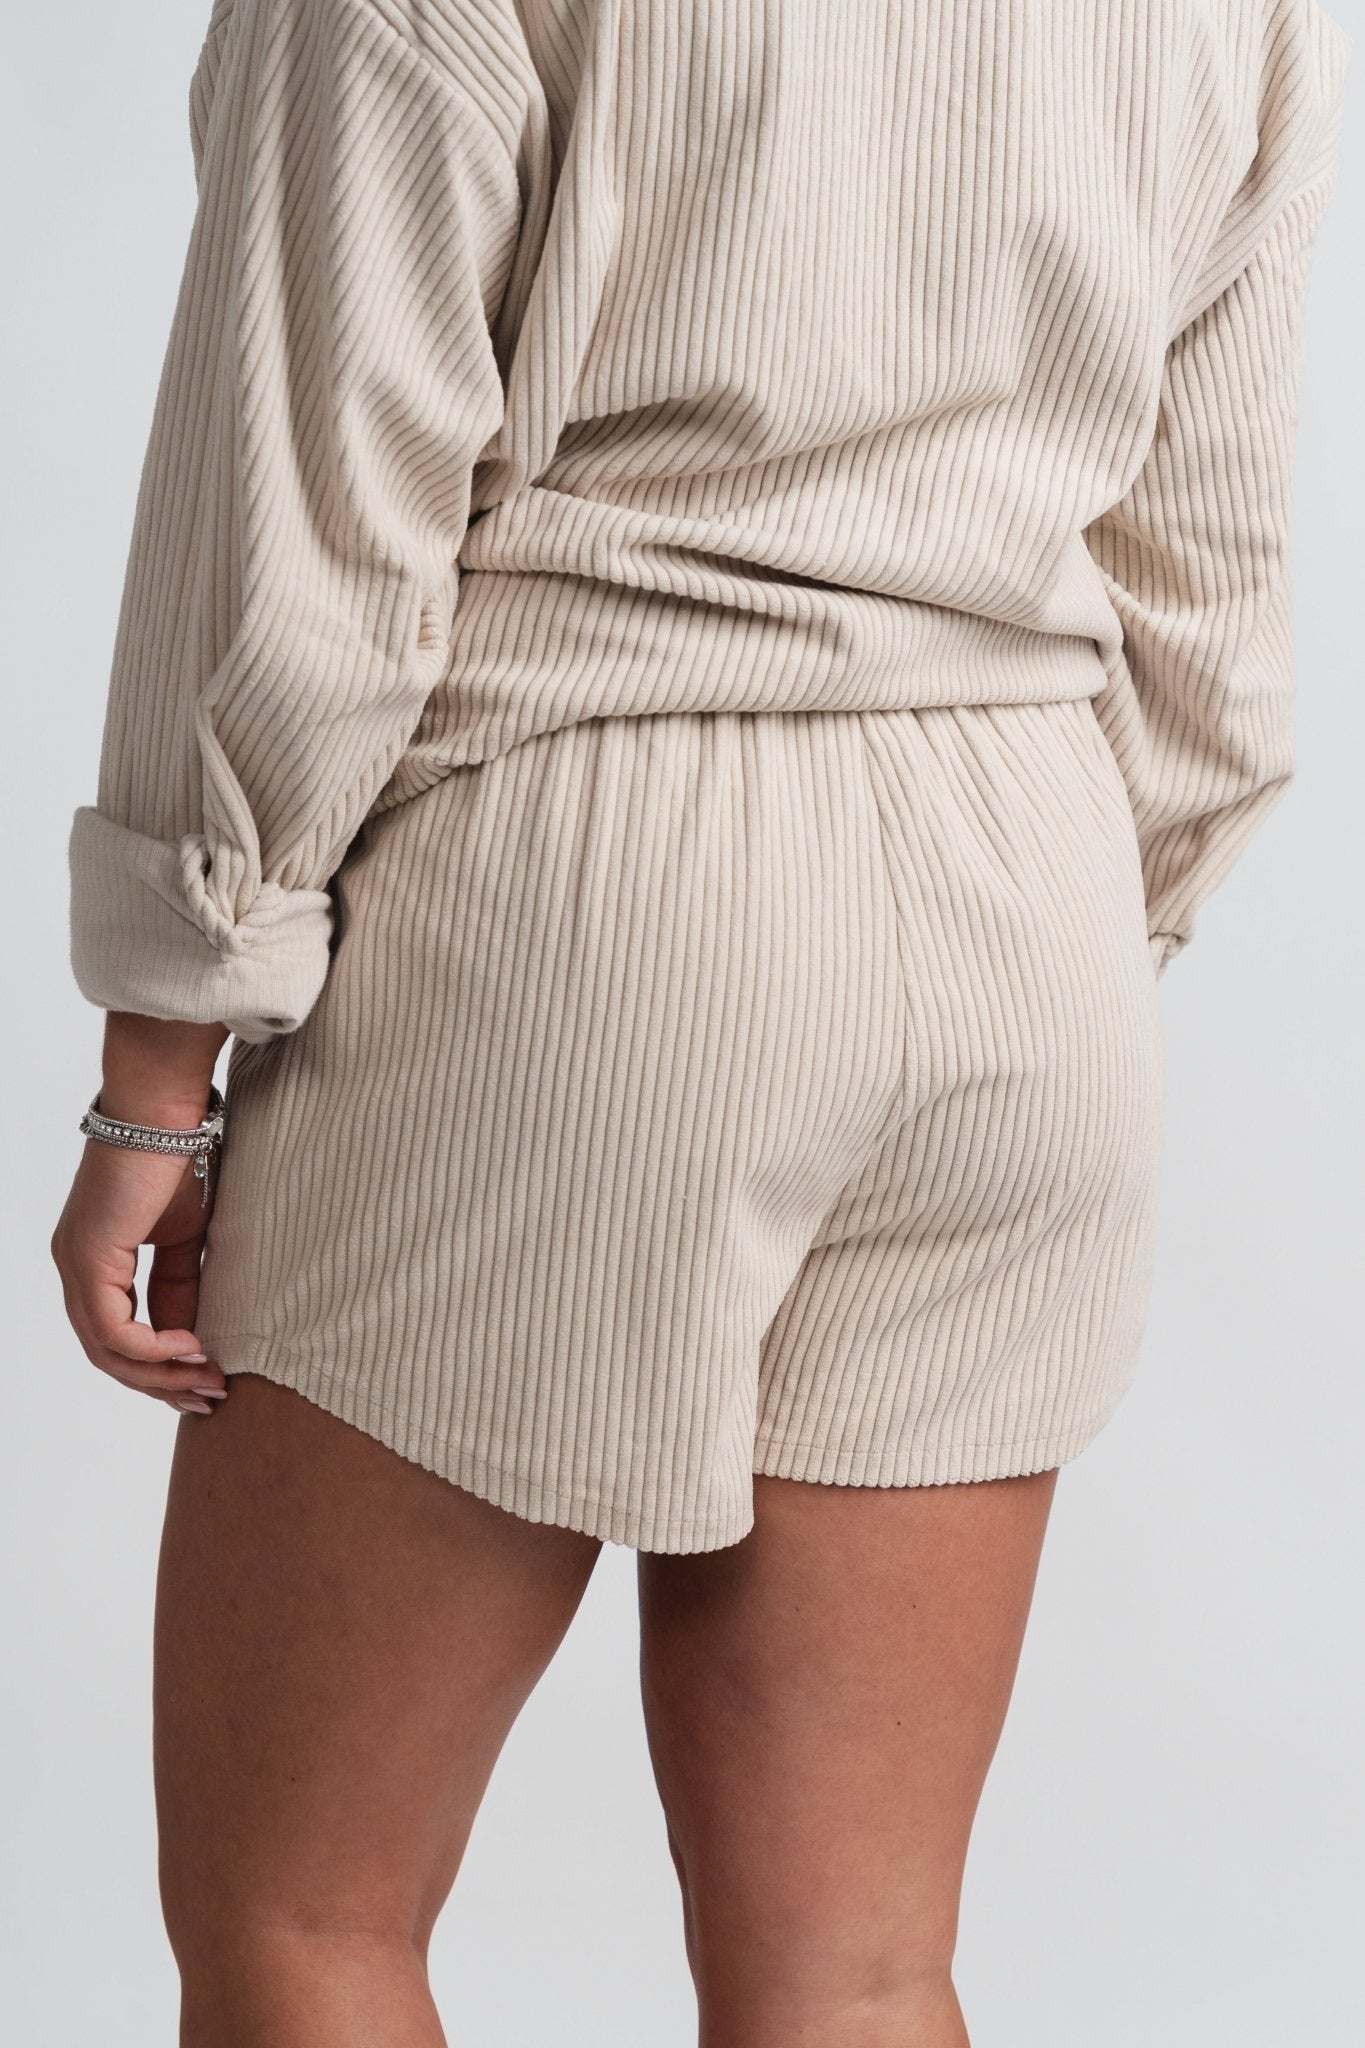 Corduroy shorts beige - Adorable Shorts - Stylish Comfortable Outfits at Lush Fashion Lounge Boutique in OKC